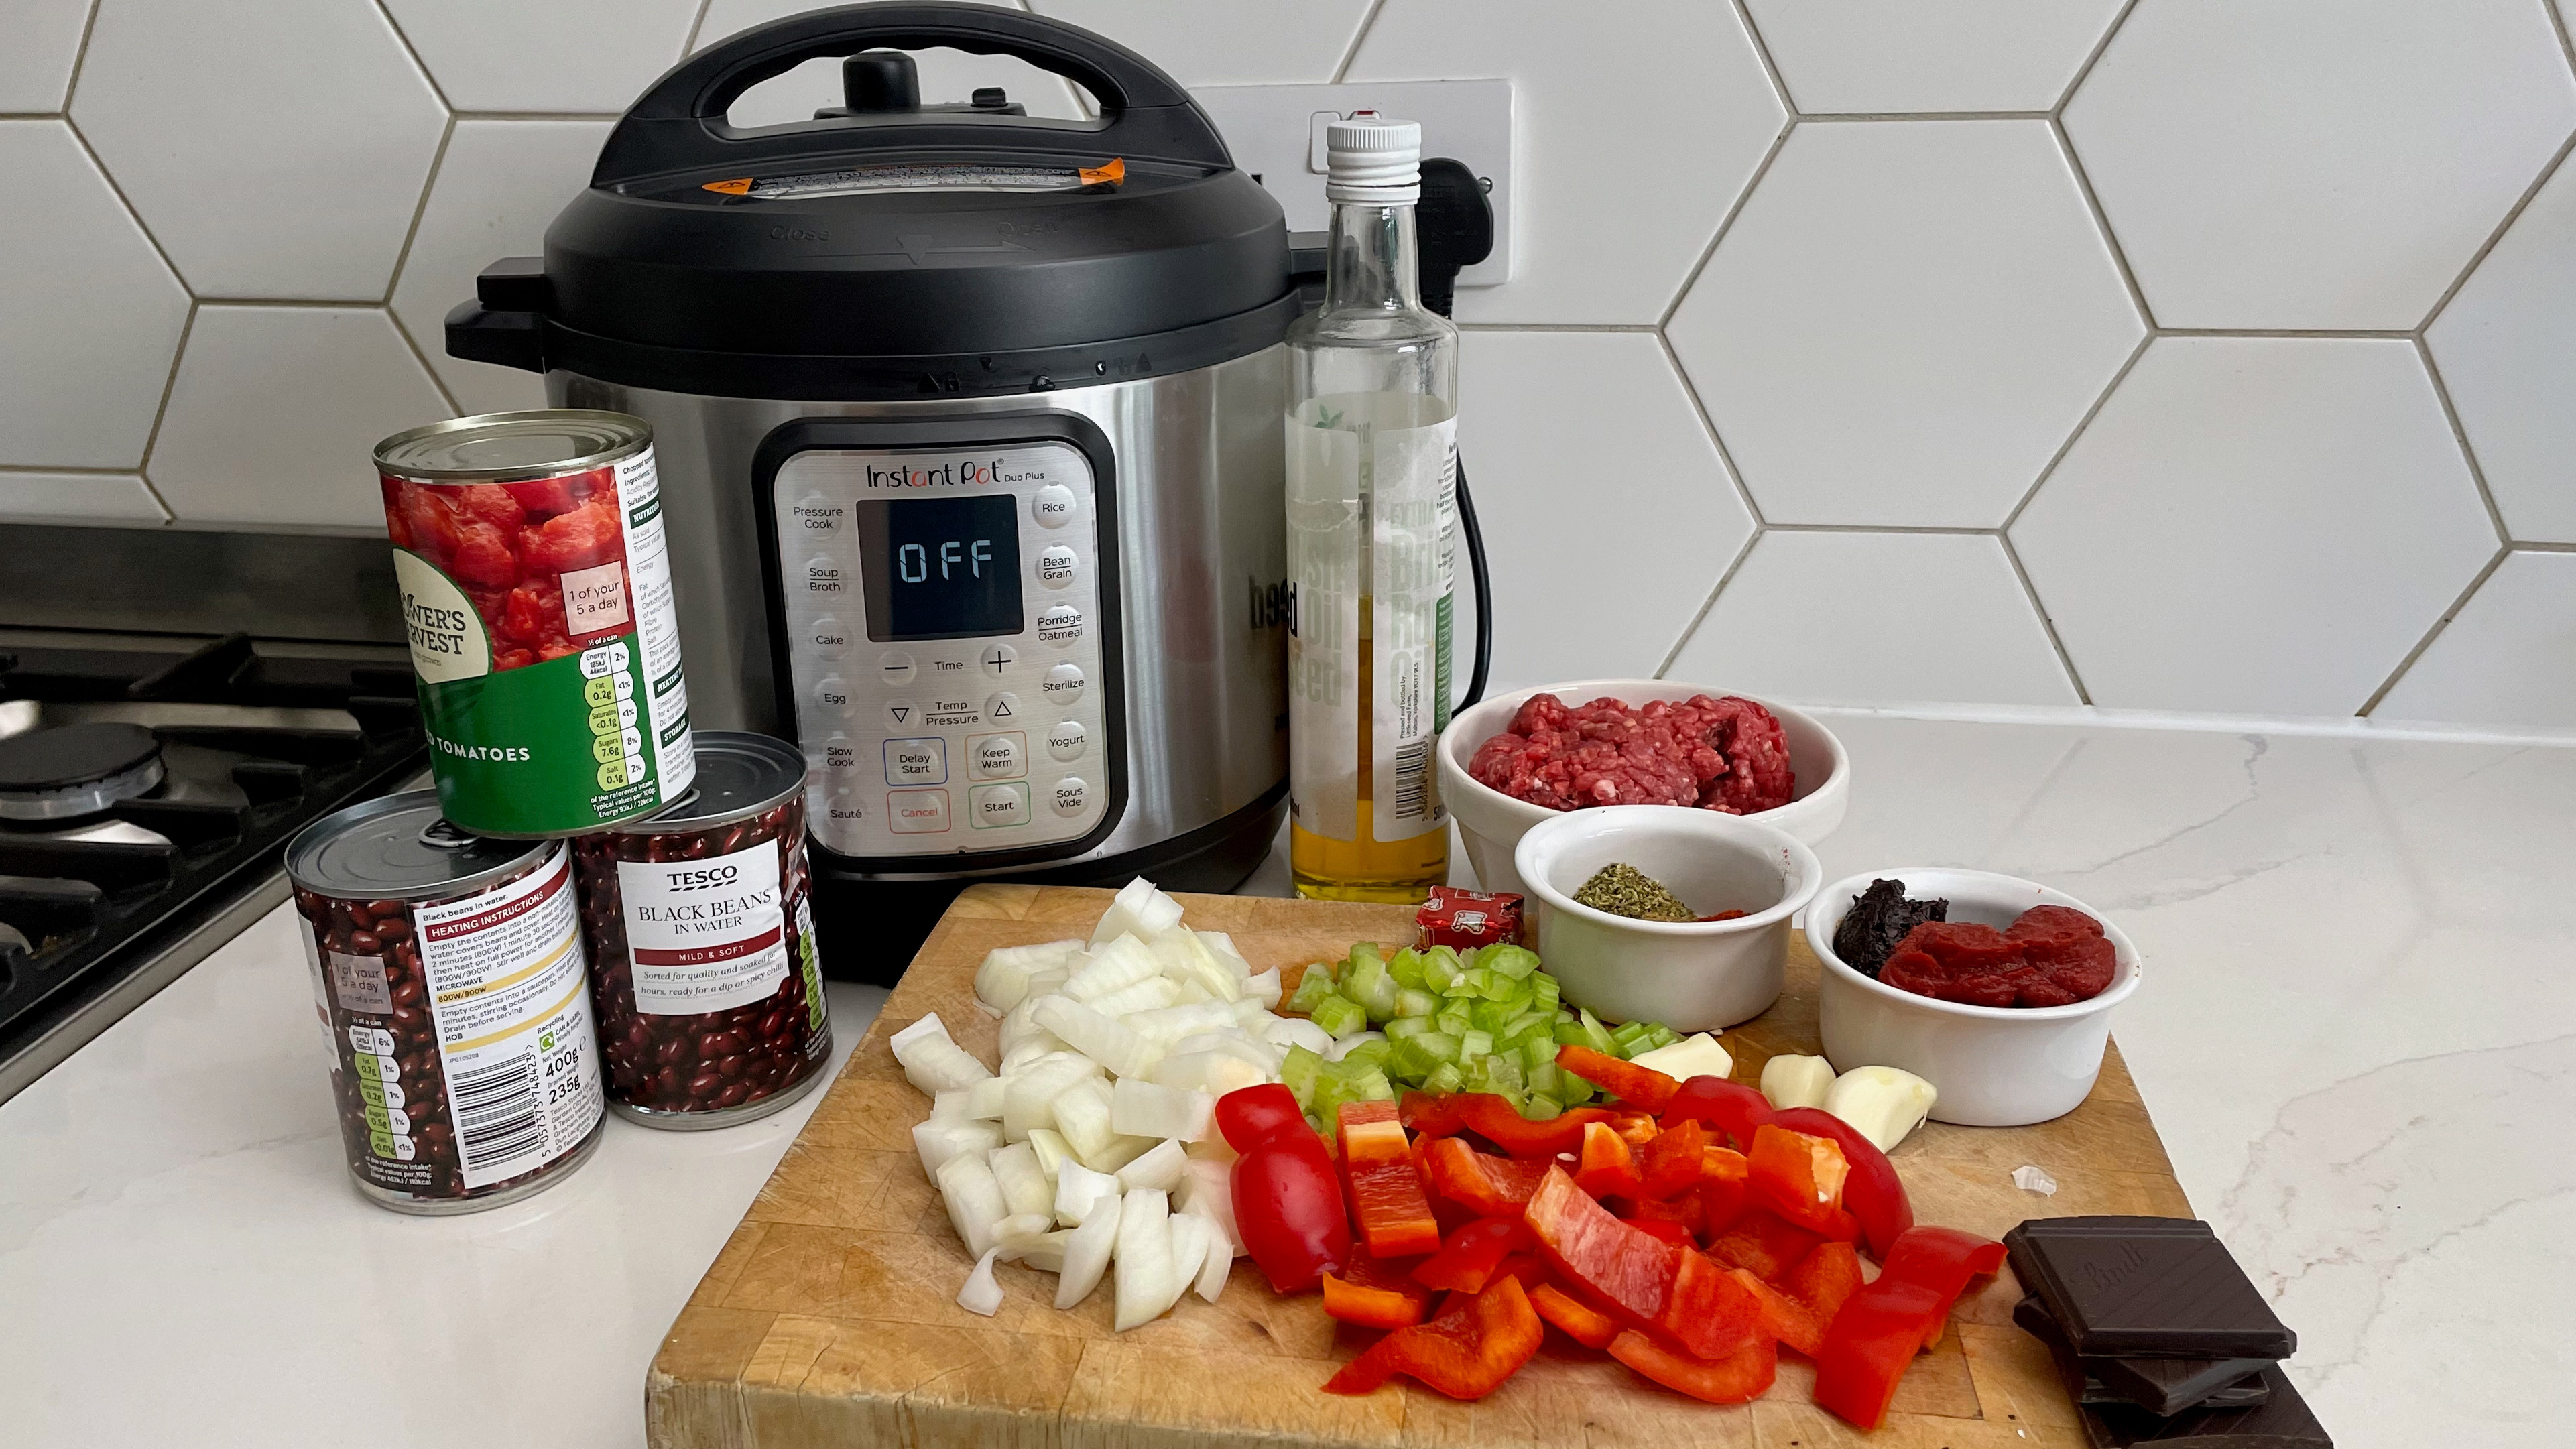 The Instant Pot Duo Plus alongside the ingredient for a slow-cooked beef chilli